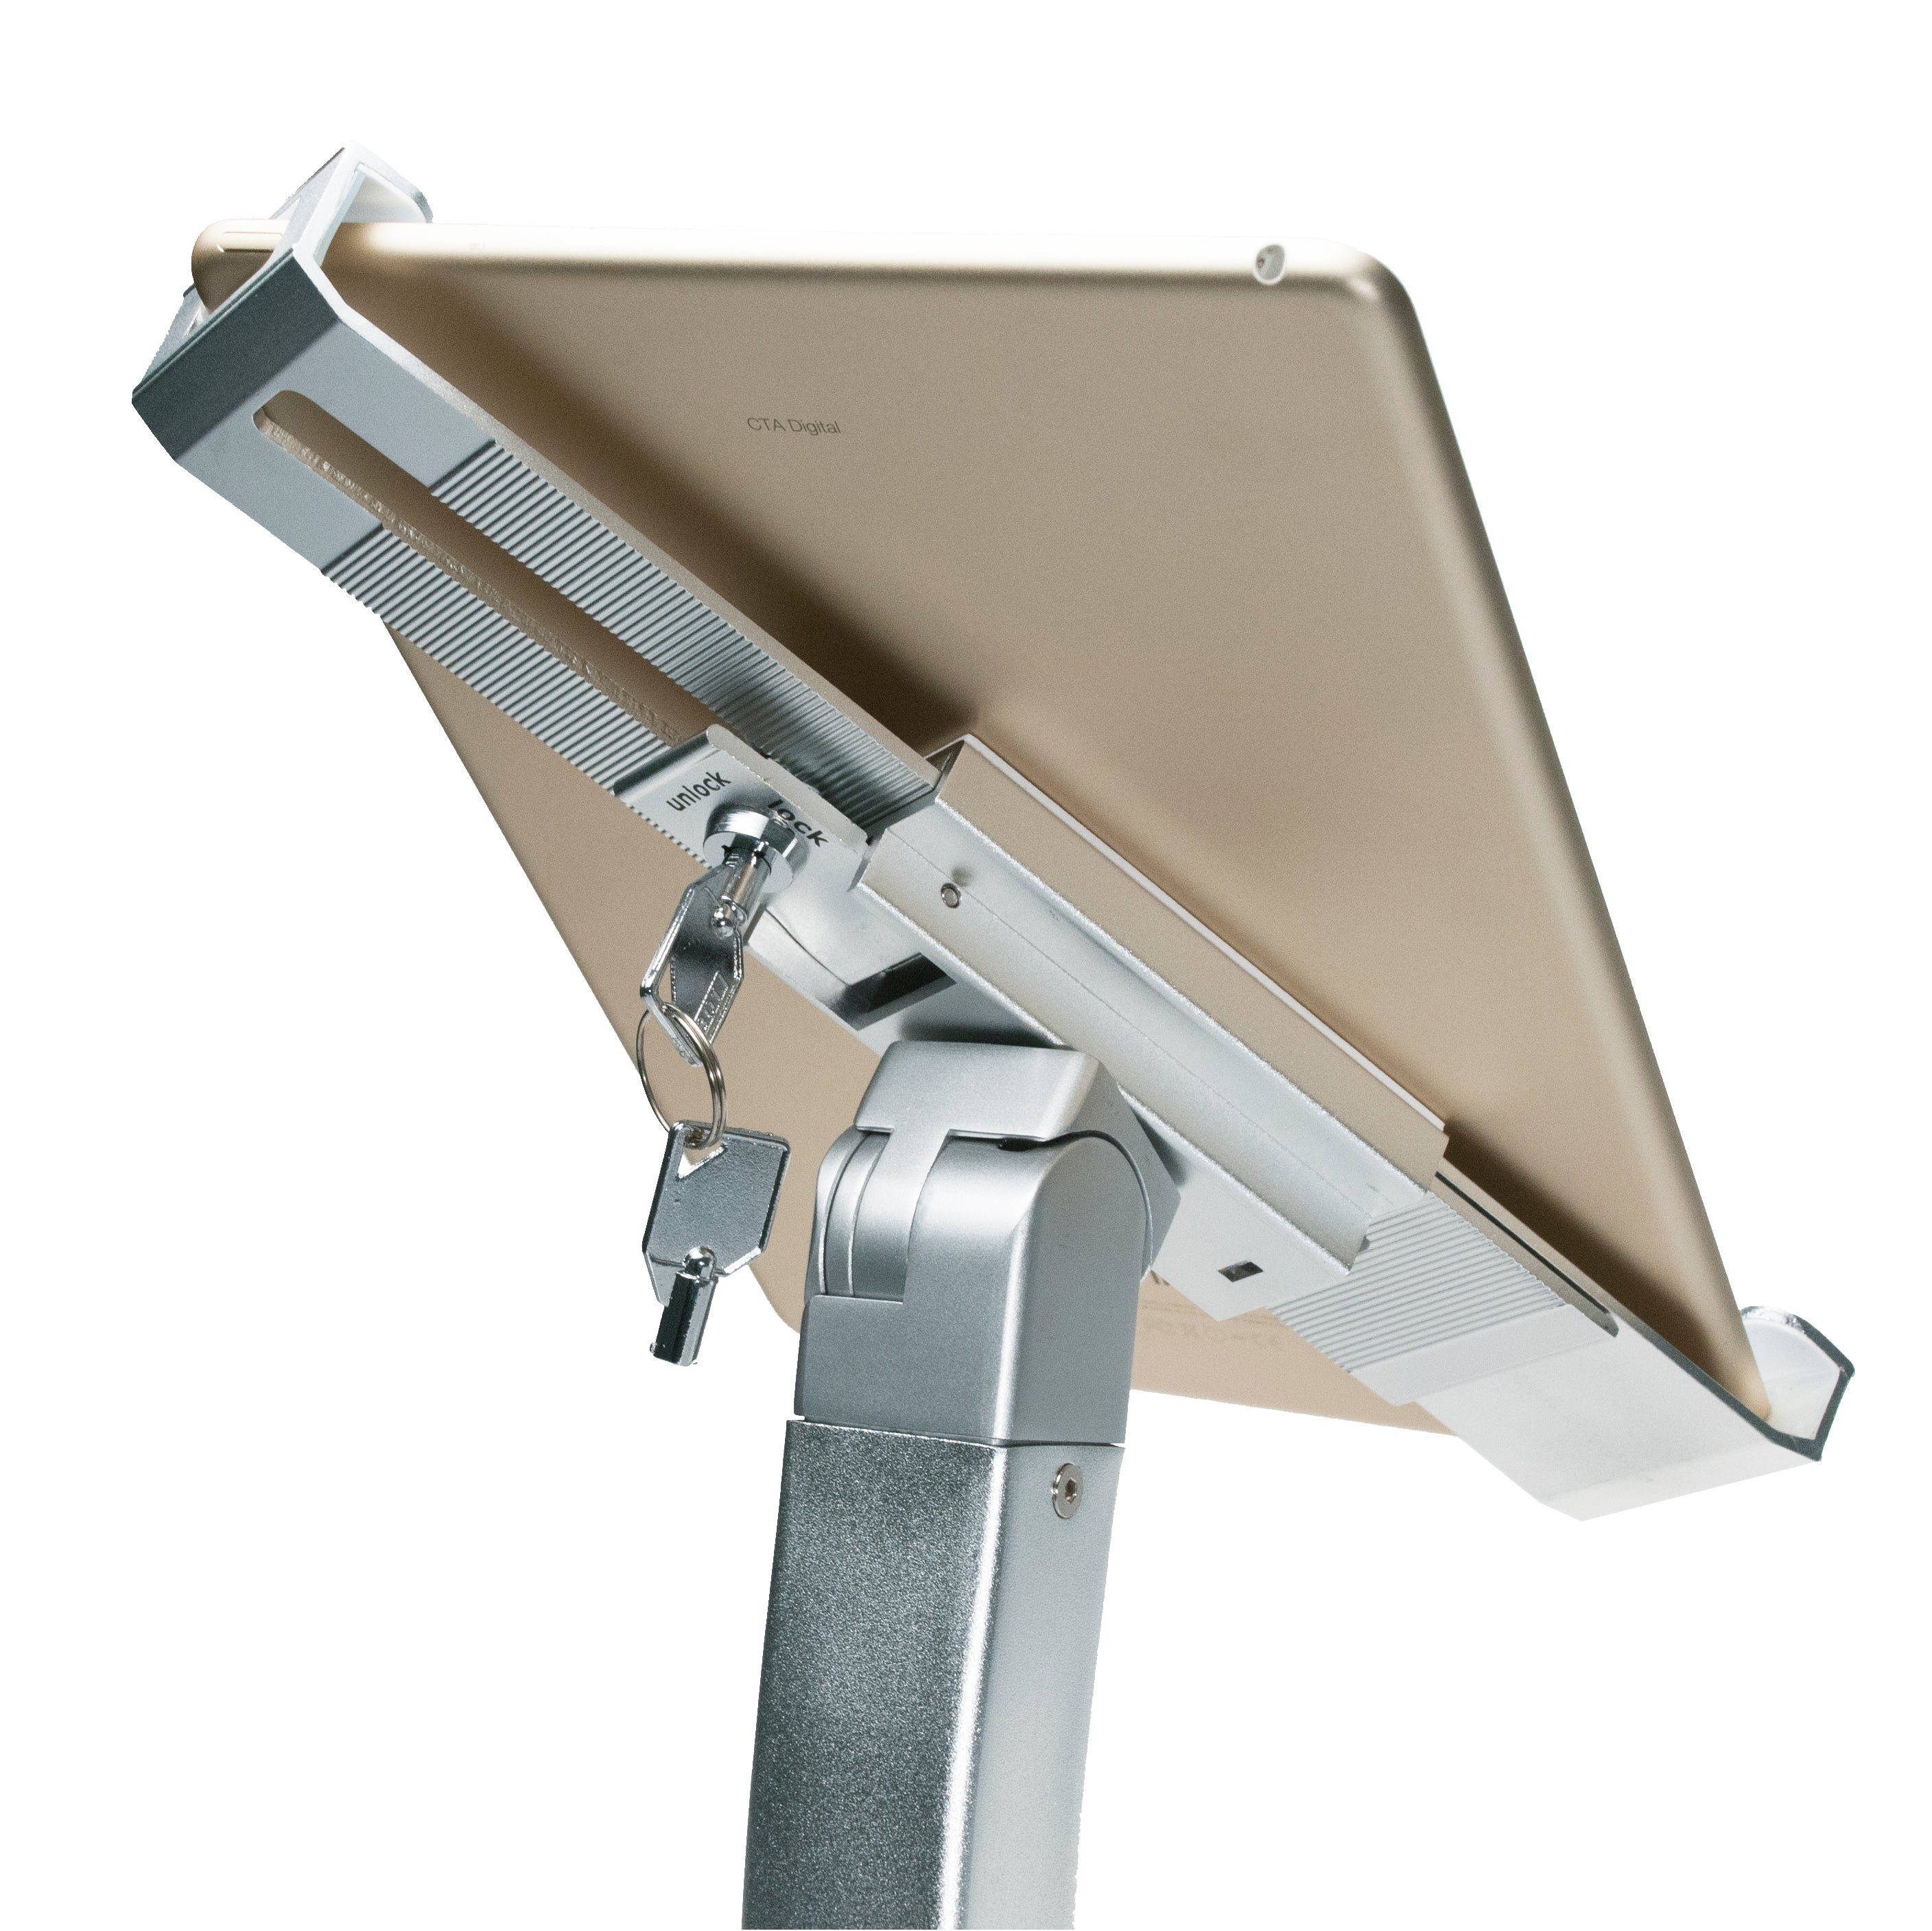 Security Tabletop and Wall Mount for 7-13 Inch Tablets, including iPad 10.2-inch (7th/ 8th/ 9th Gen.)